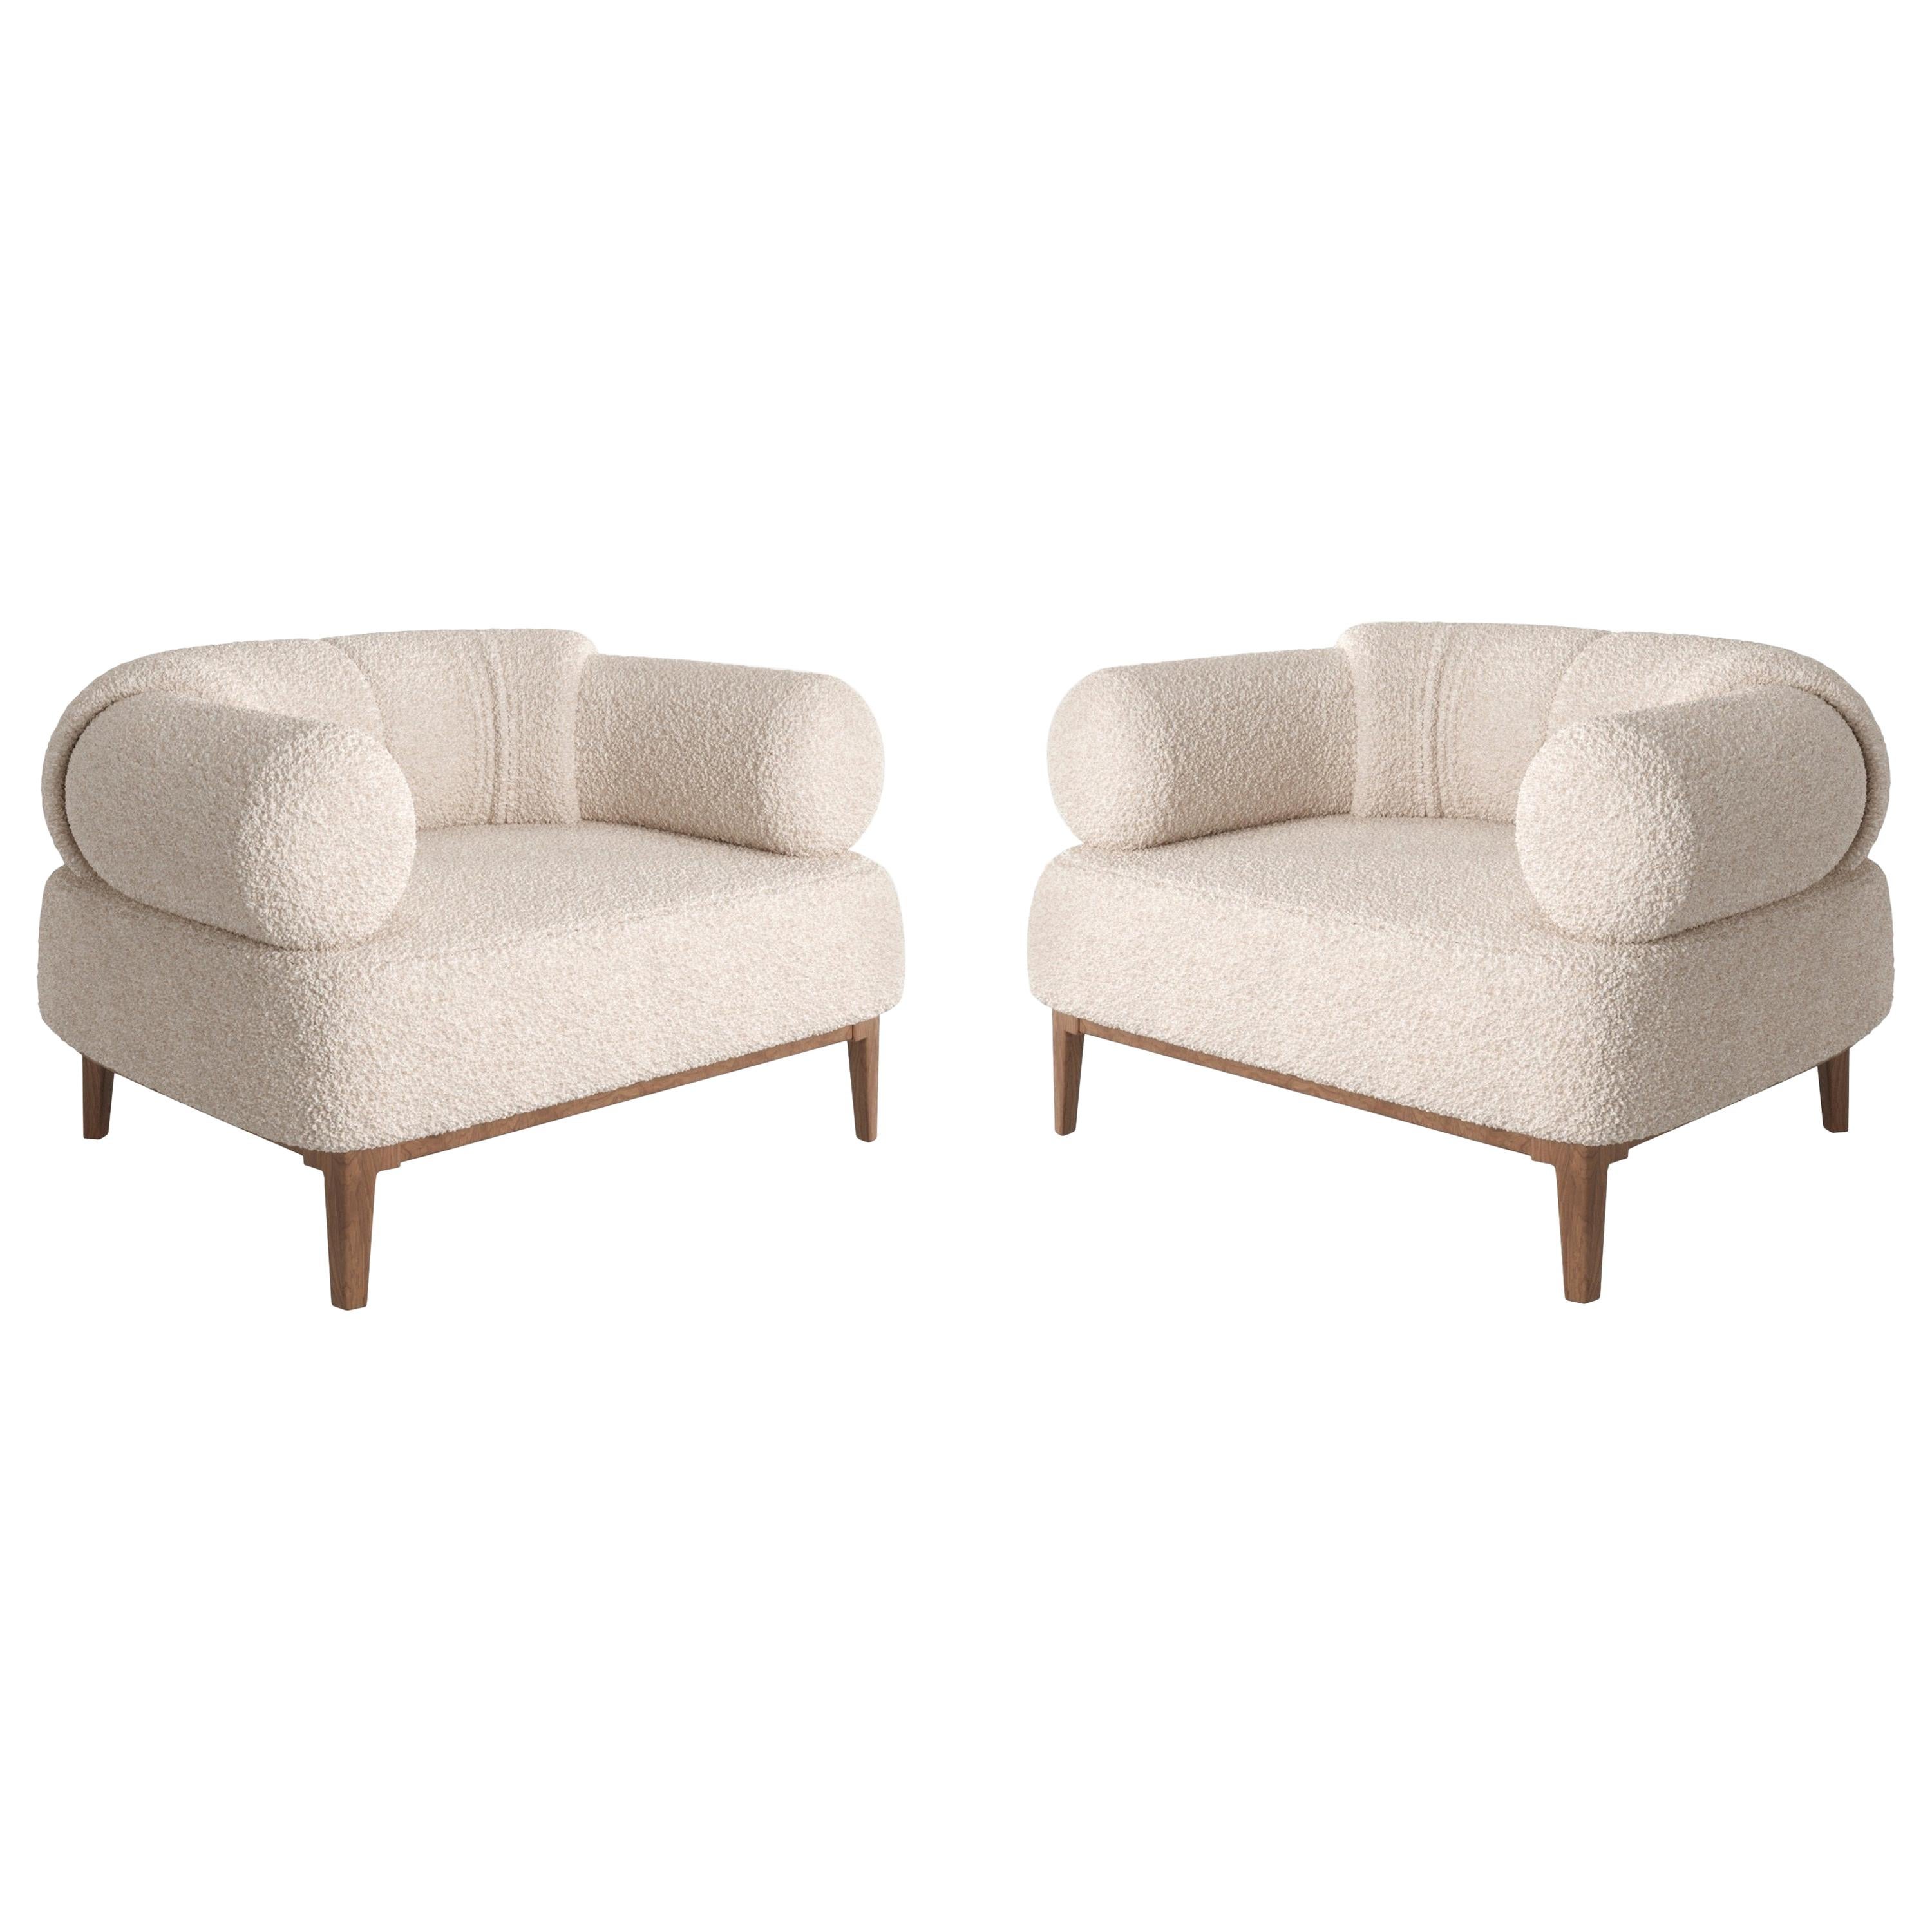 Contemporary Armchair Upholstered In Bouclé Fabric, Set of 2